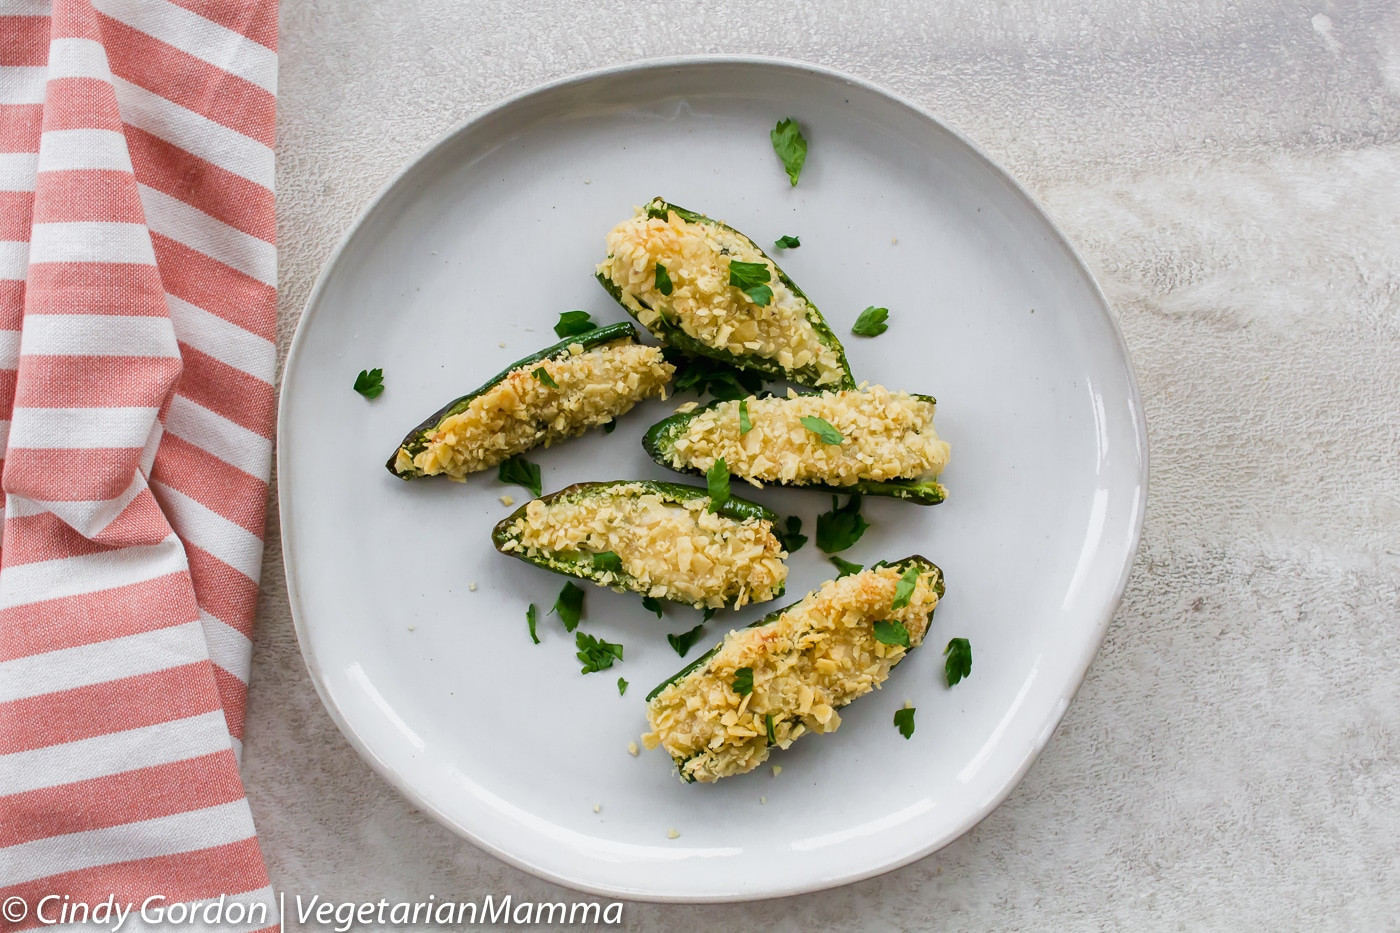 Jalapeno Poppers In Air Fryer
 Air Fryer Jalapeno Poppers Think Game Day Snacks for 2019